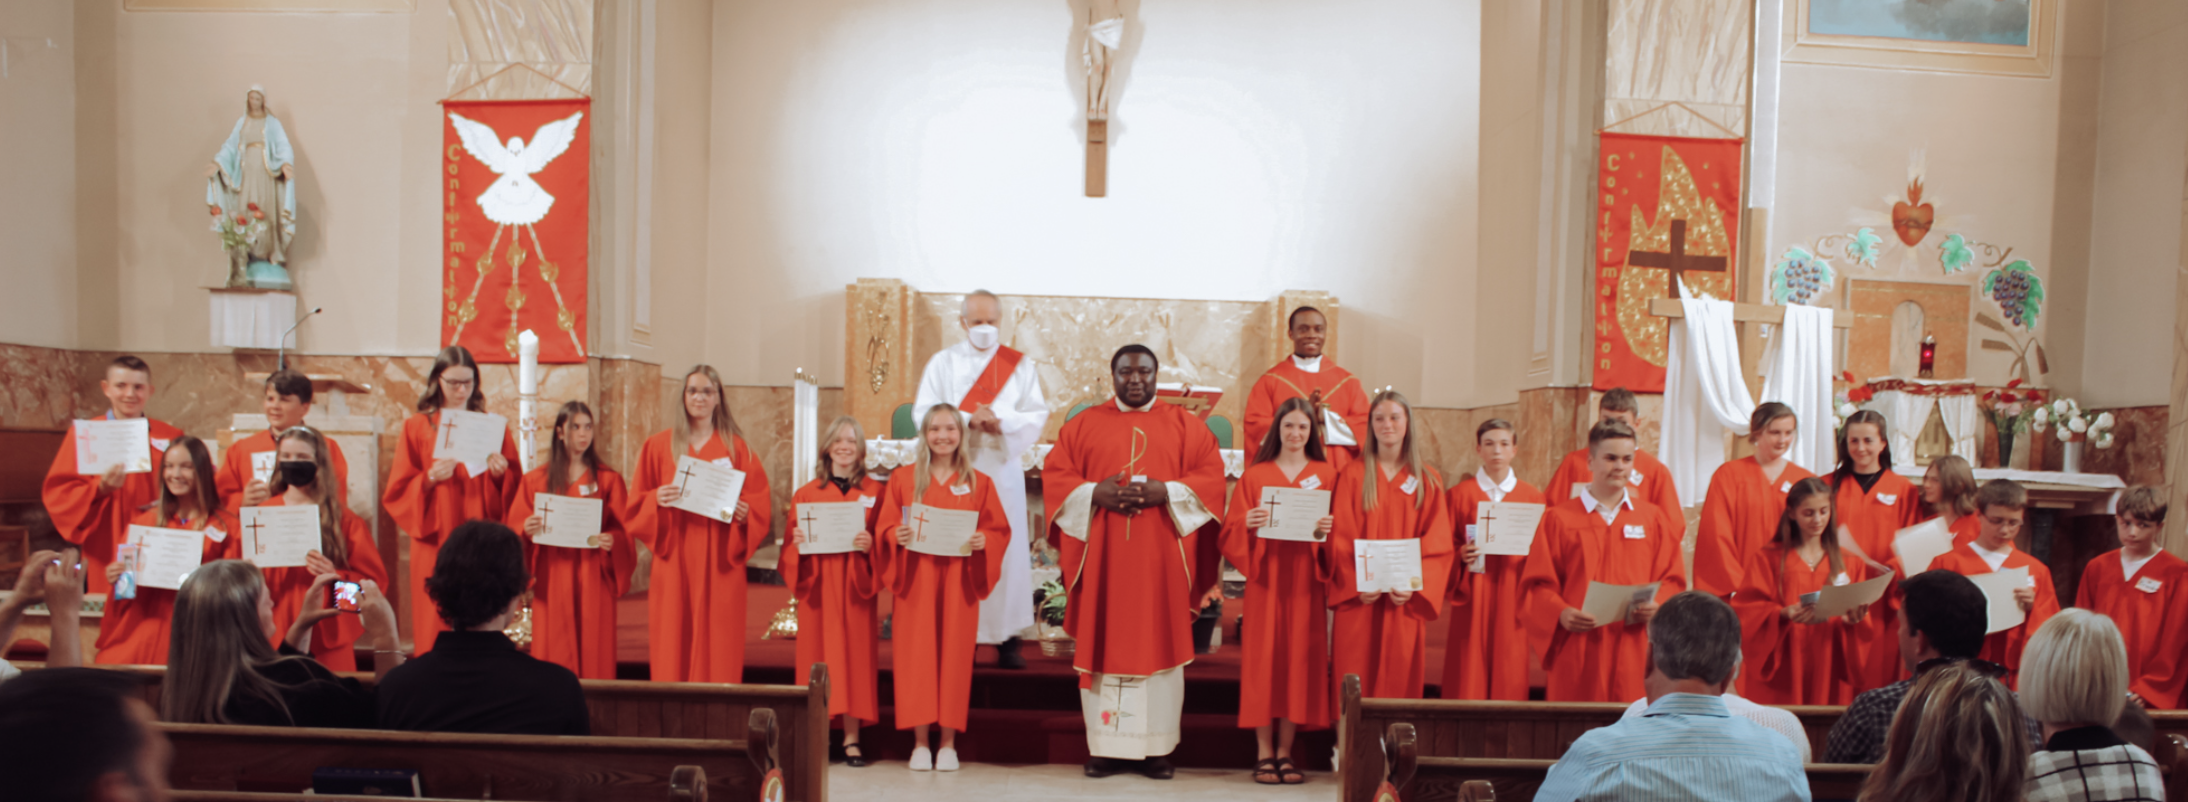 confirmation group photo 2022- confirmandi standing with fr. simon, fr. ben and deacon milton, while holding certificates